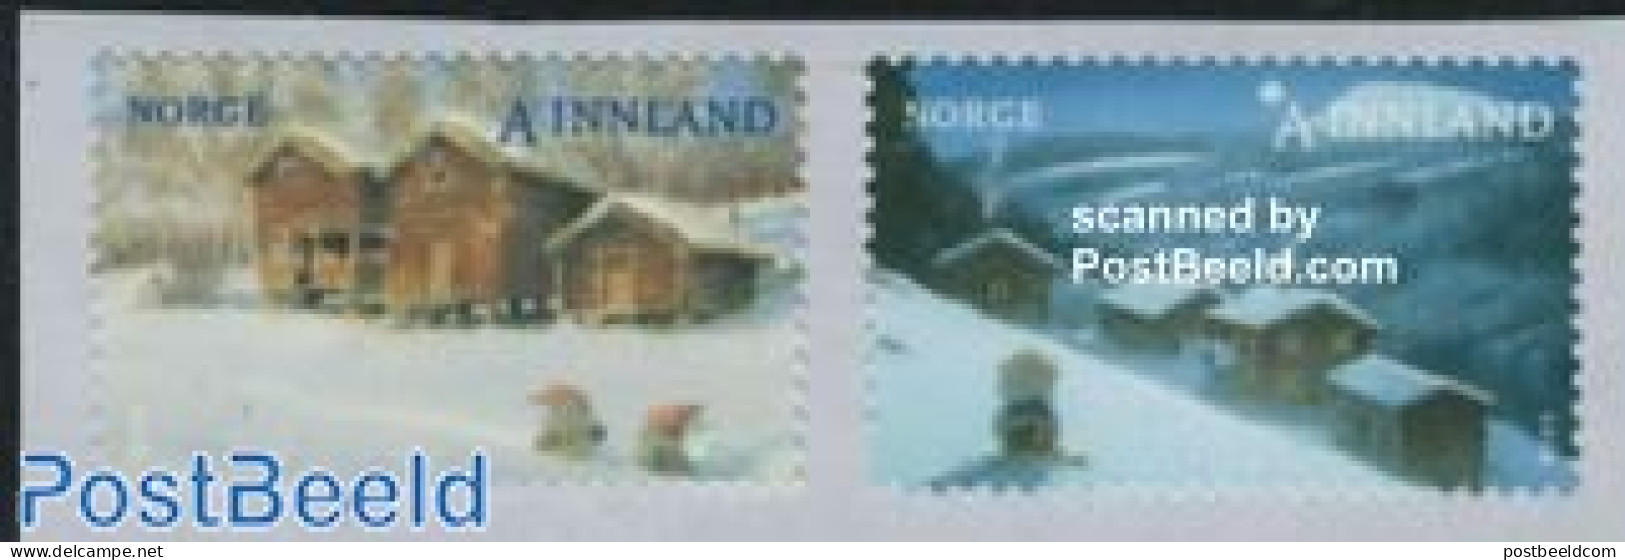 Norway 2008 Christmas 2v S-a, Mint NH, Religion - Christmas - Neufs